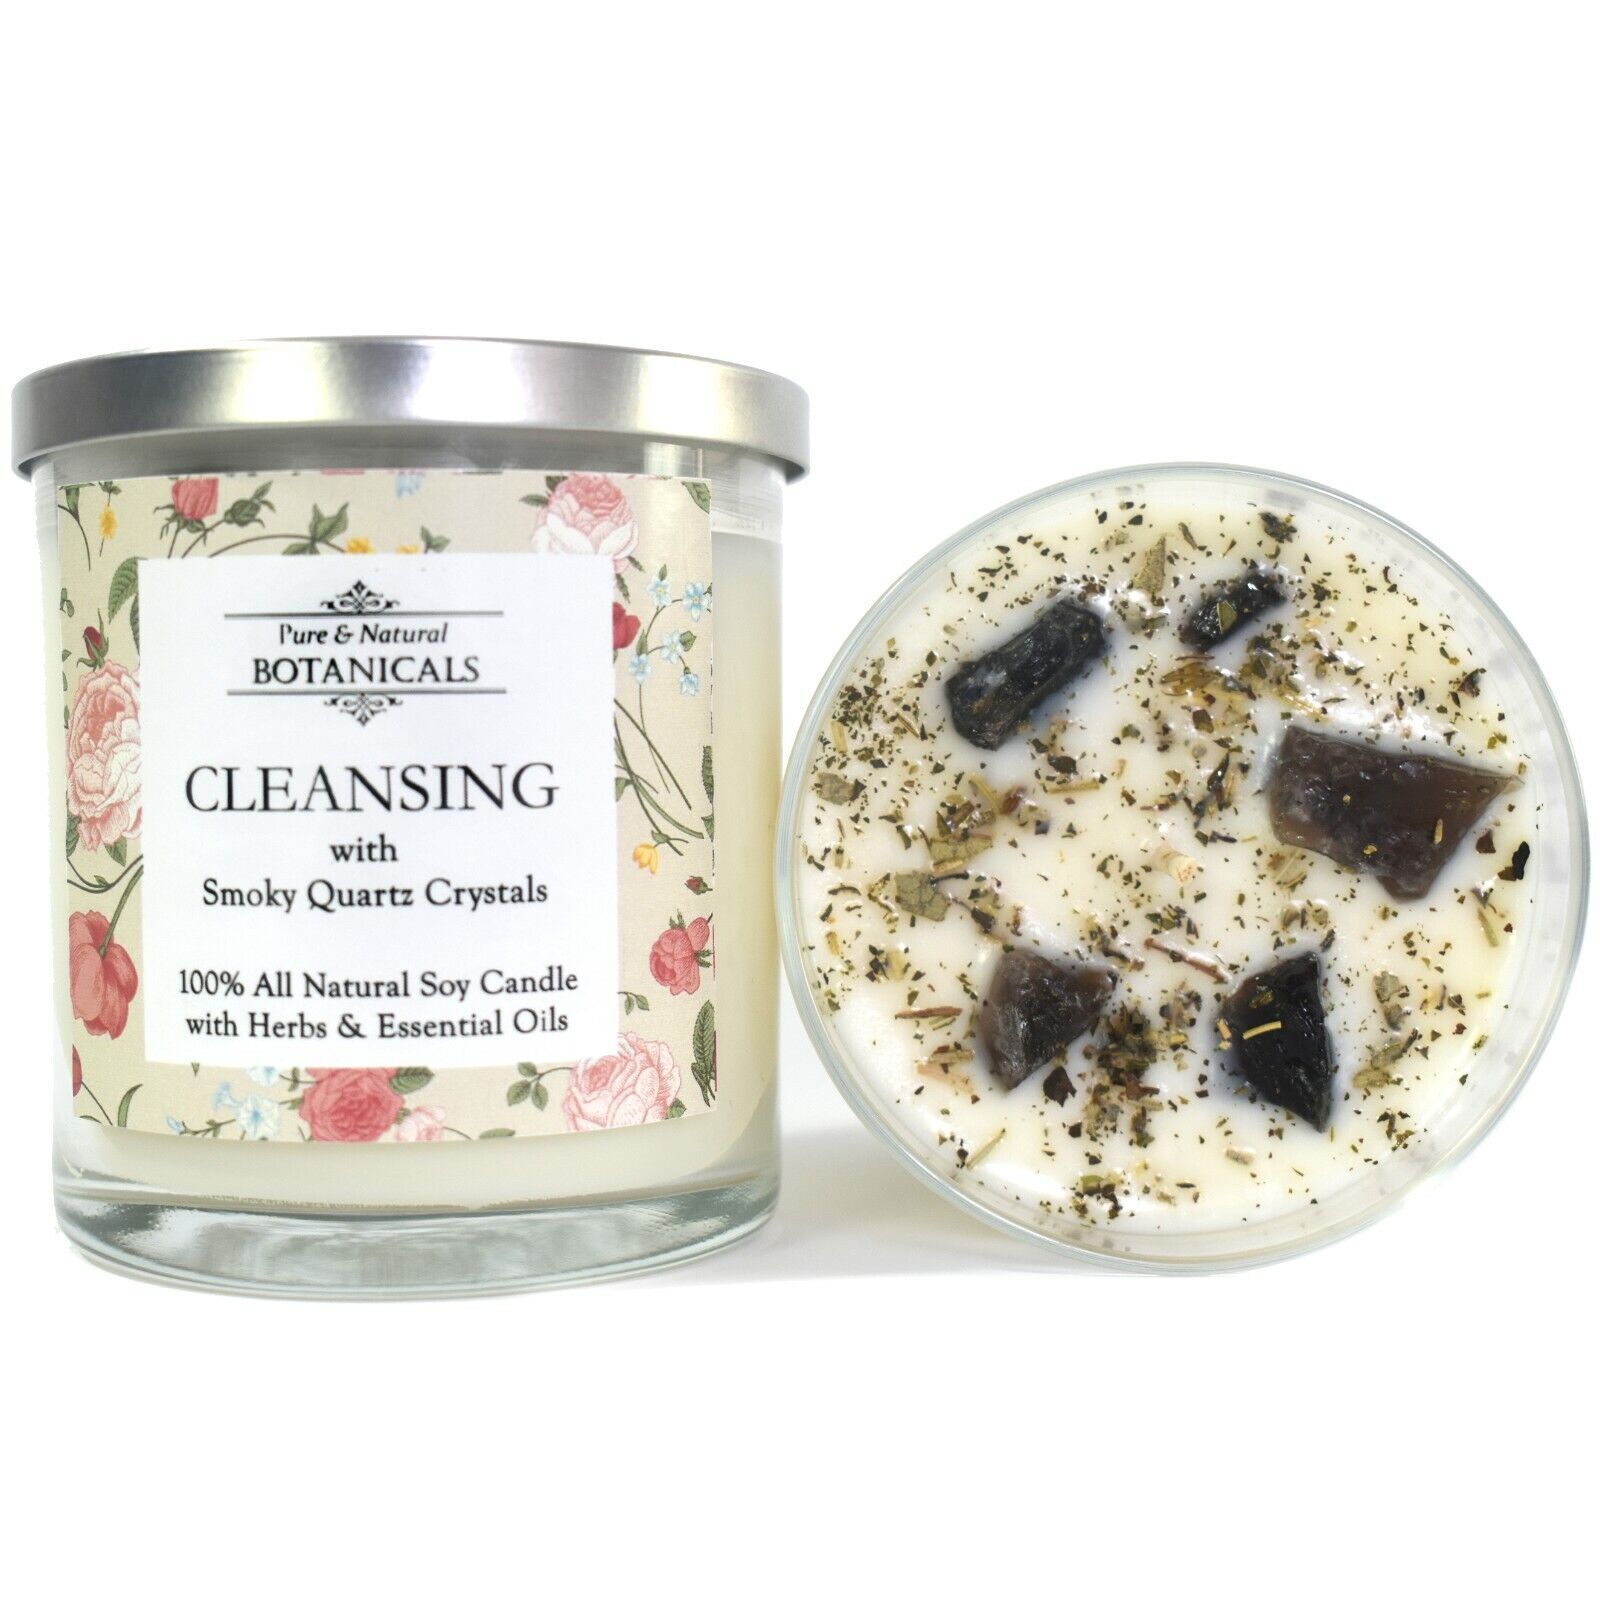 Cleansing Soy Candle Natural w/ Smokey Quartz Crystals Purification Wiccan Pagan